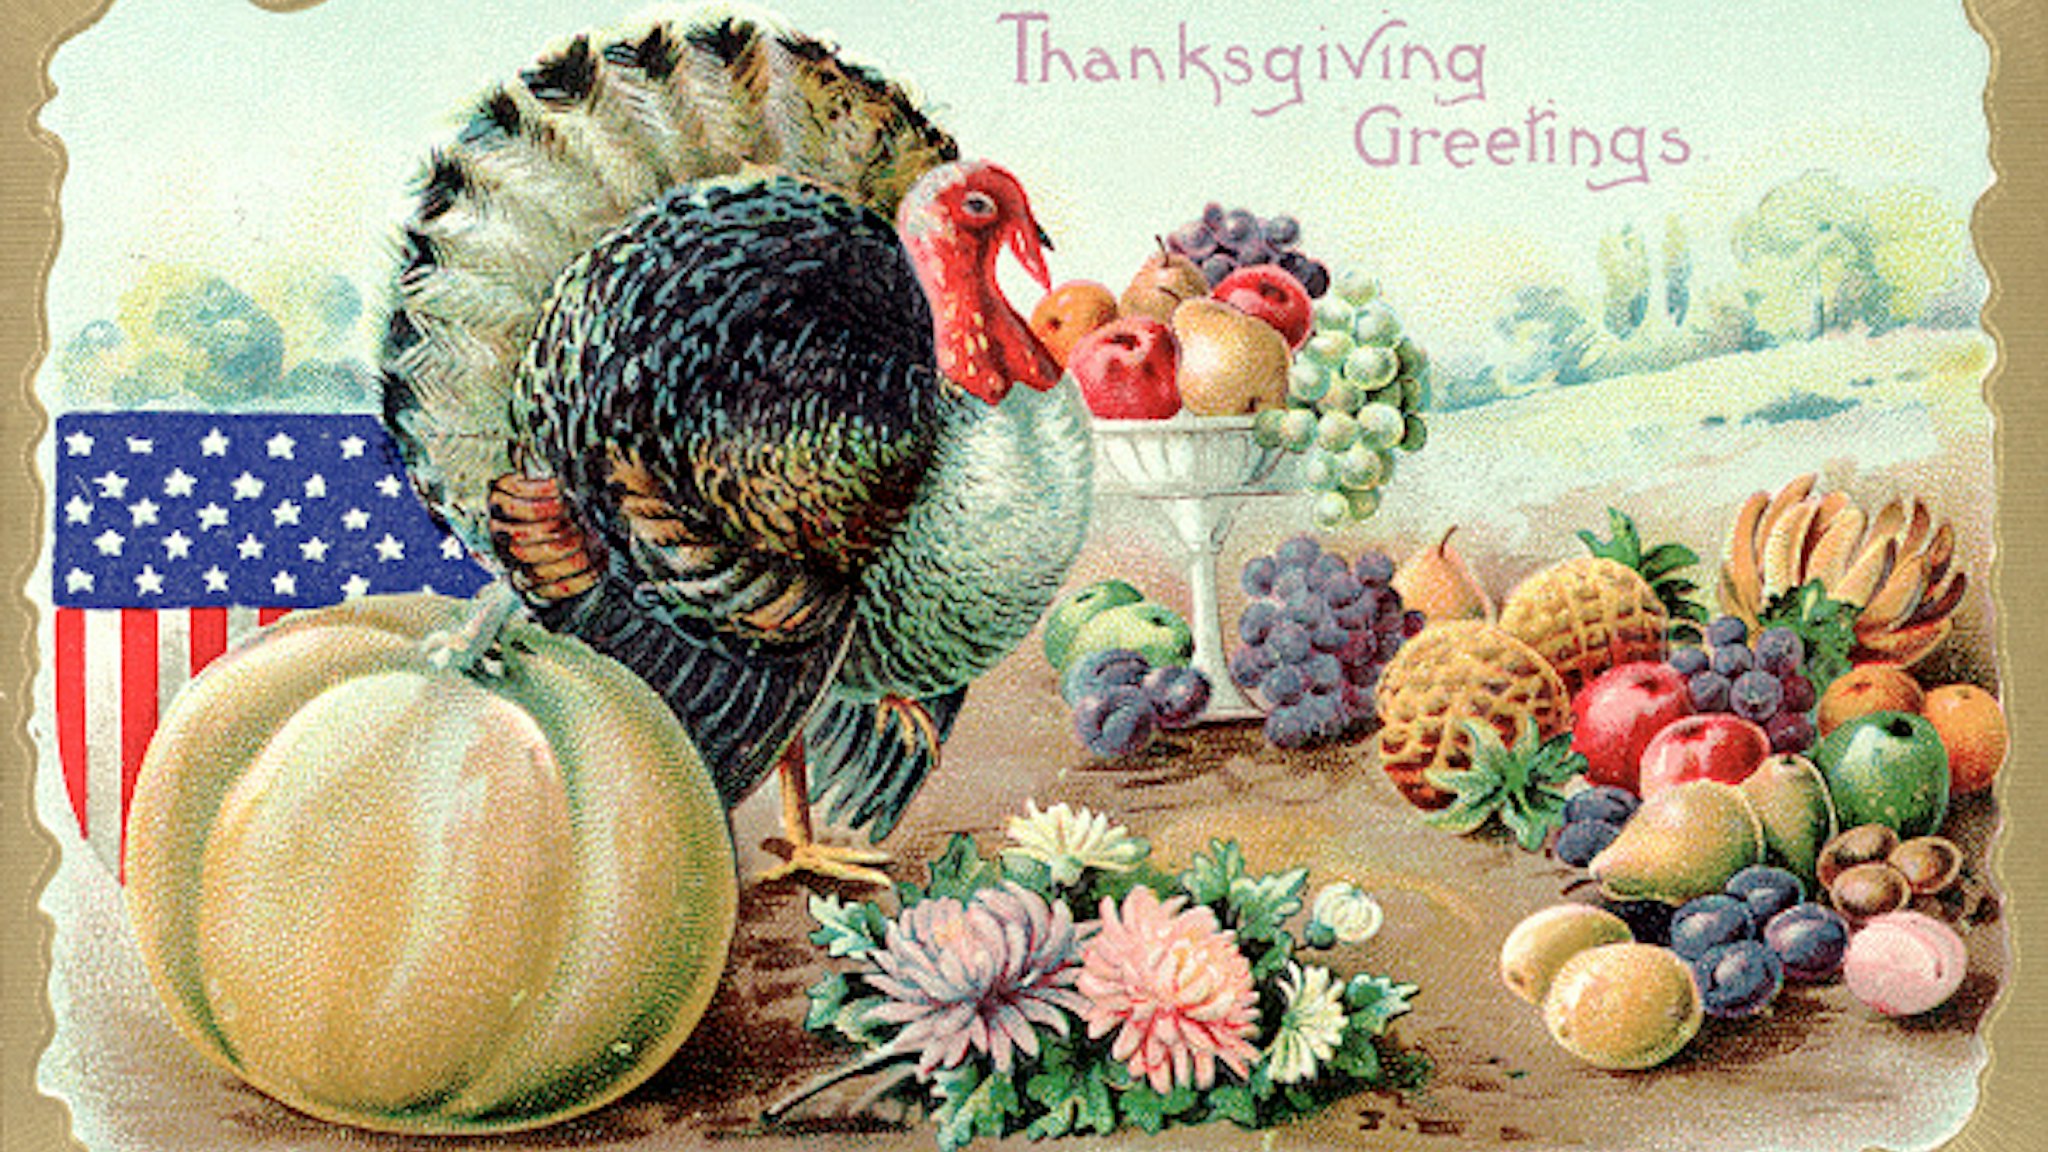 Thanksgiving Greetings Postcard with a Turkey and Fruit